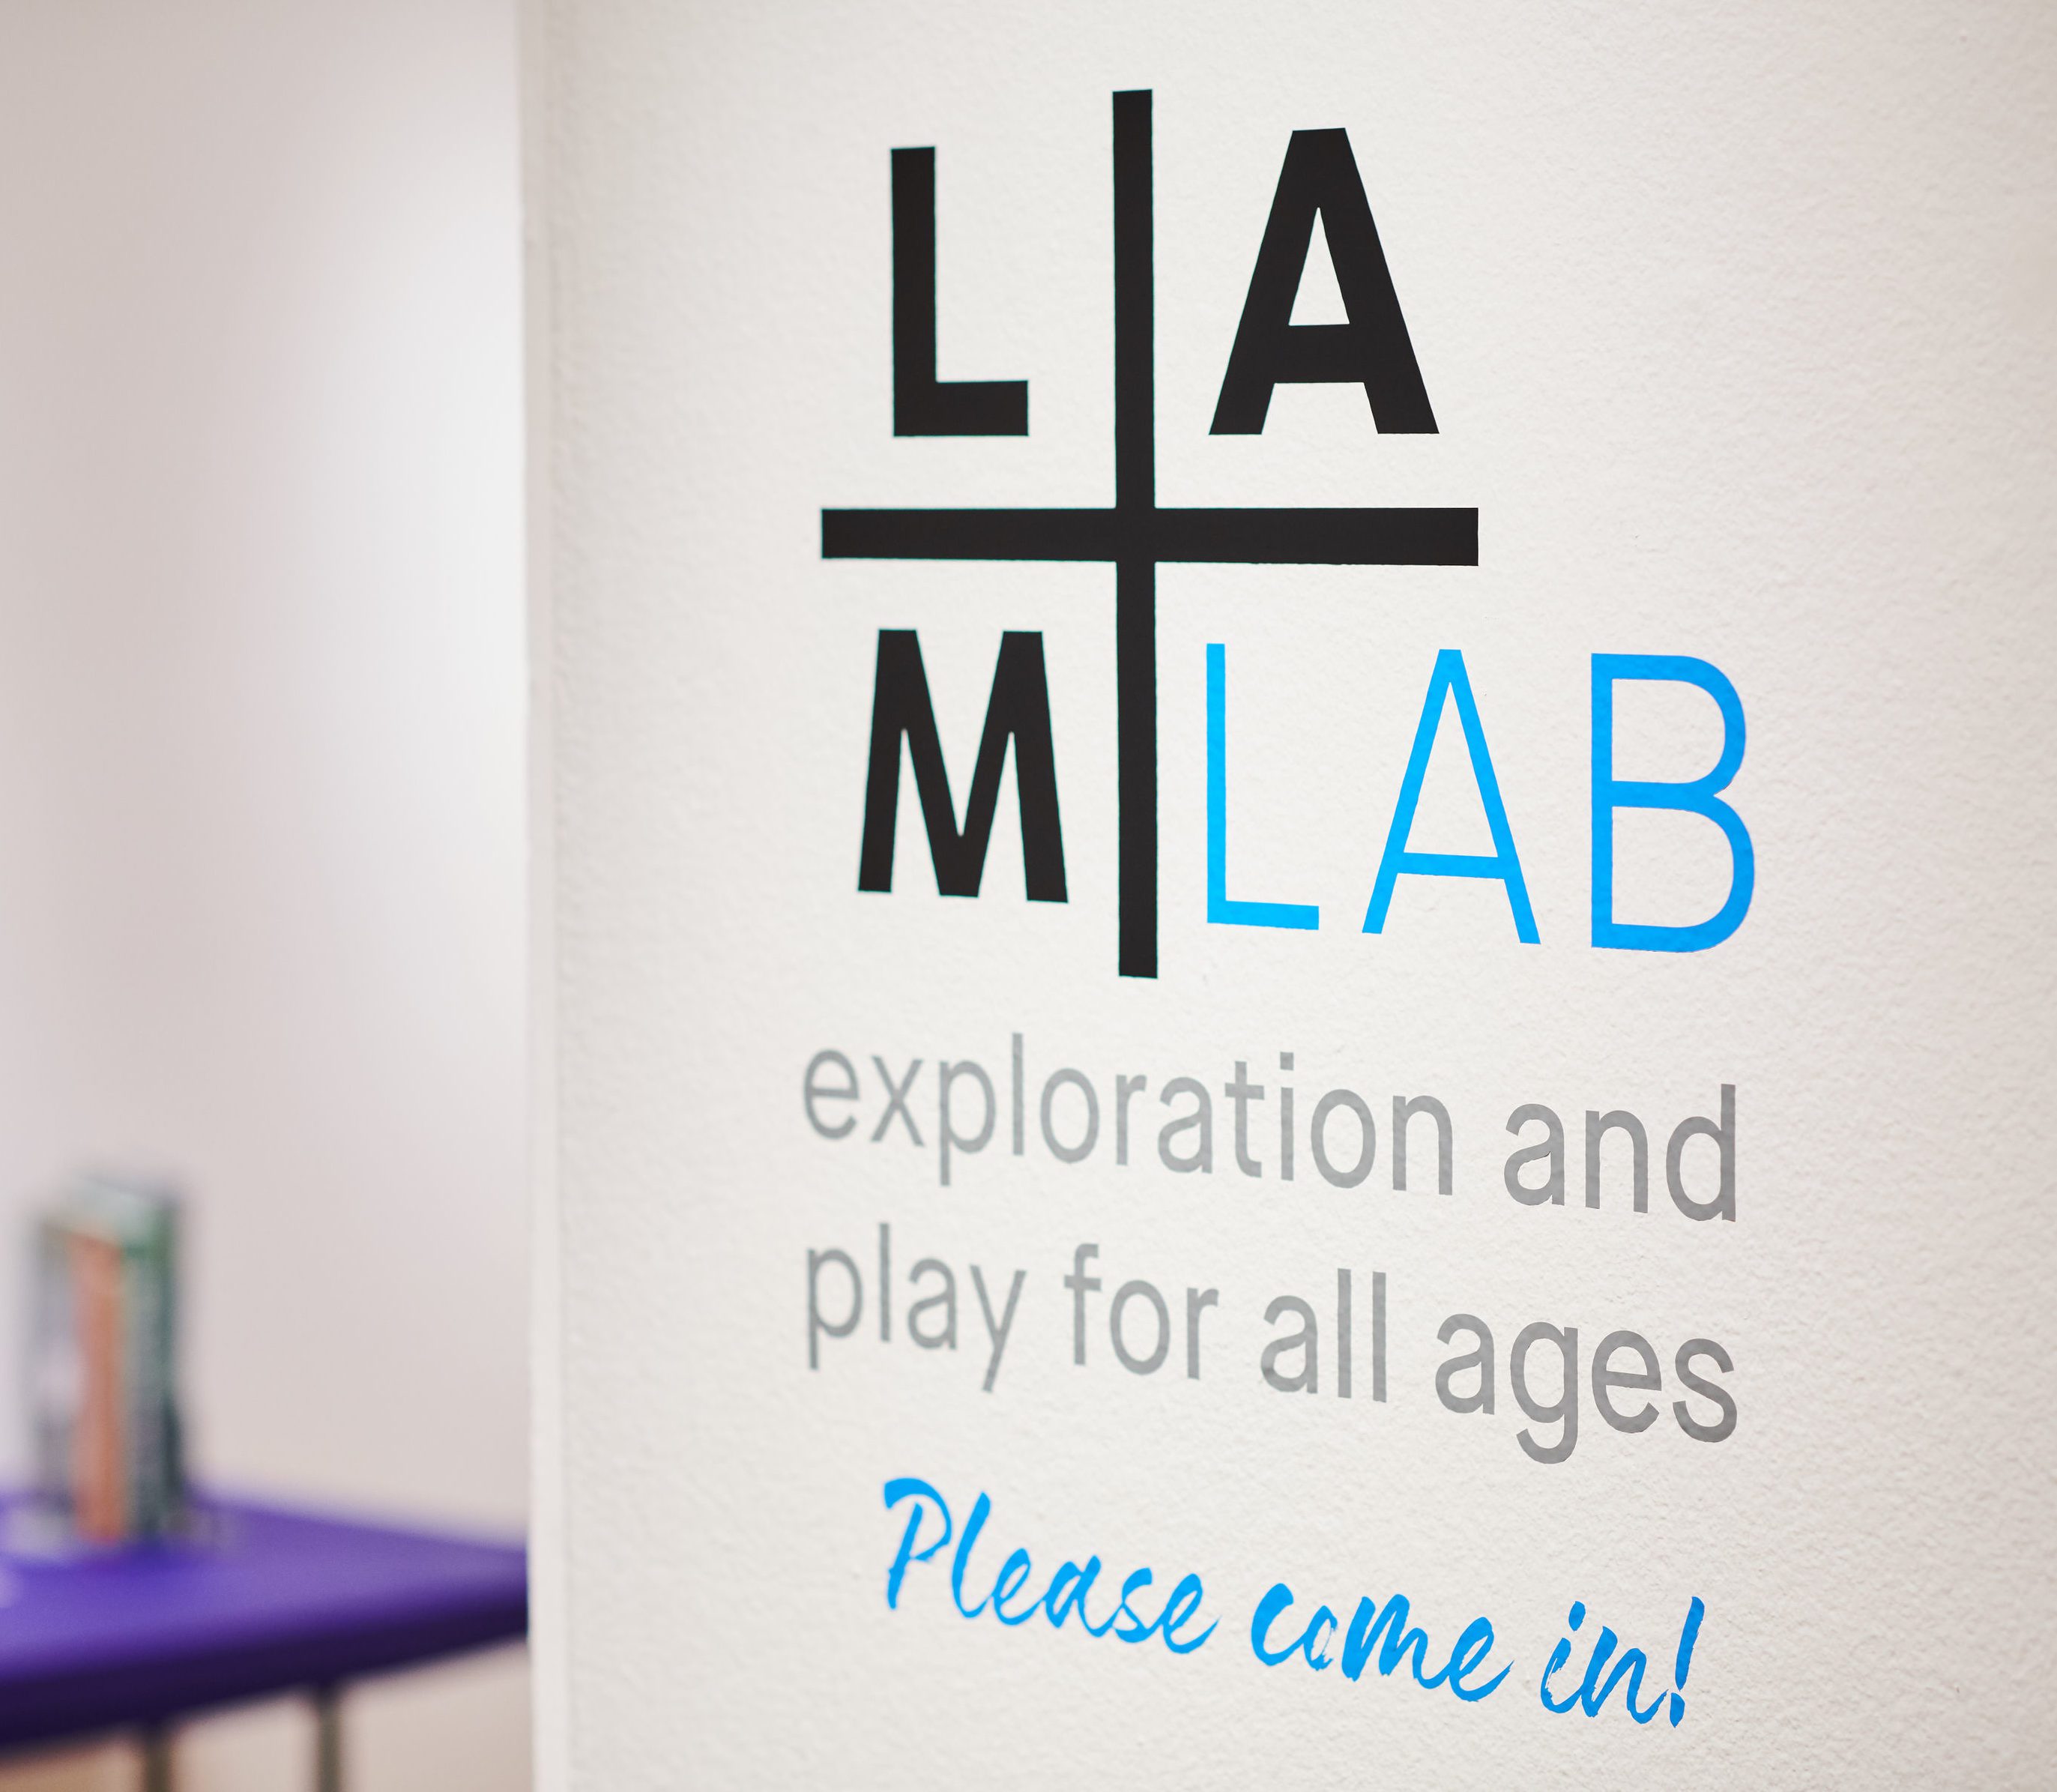 LAM+LAB is a space for exploration and play for all ages